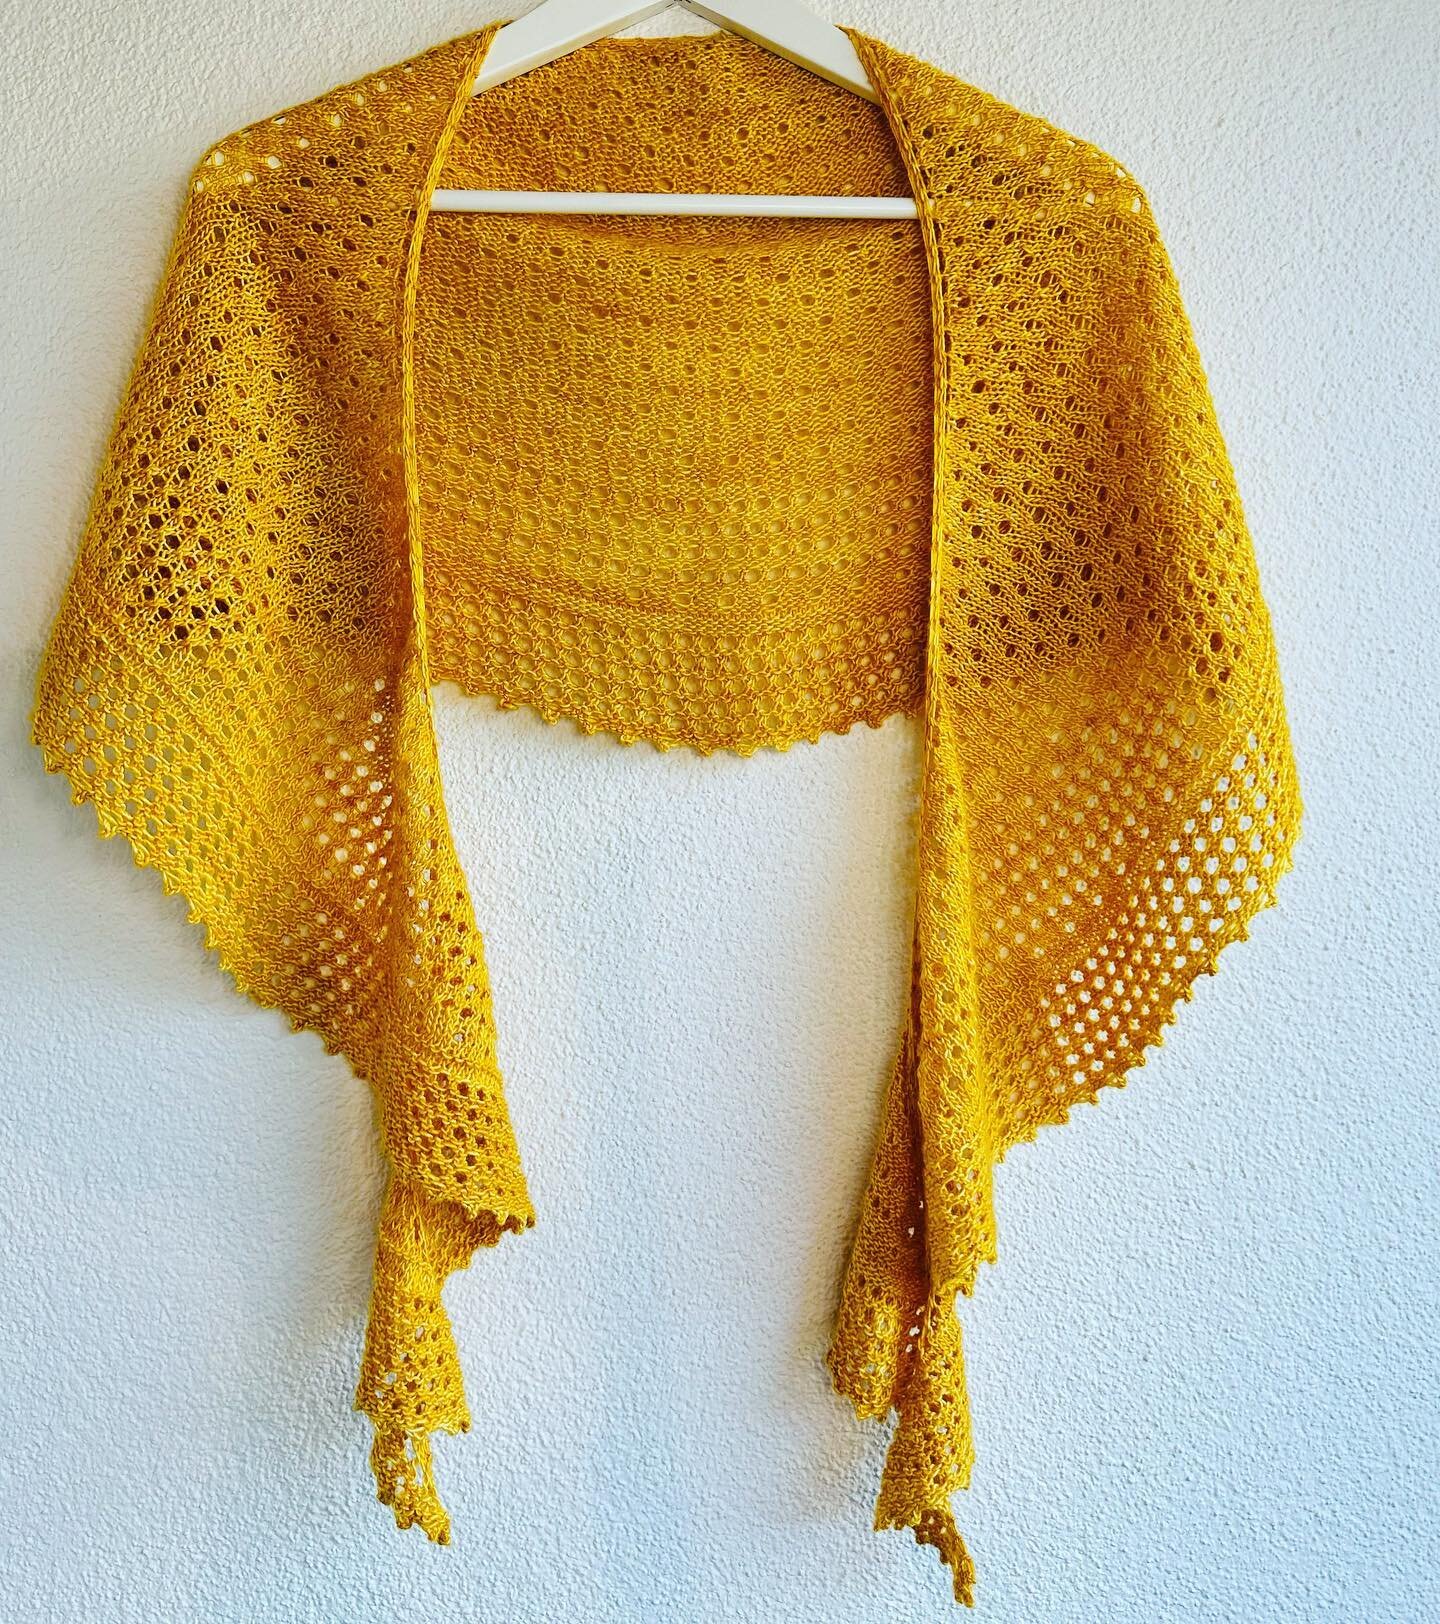 Pebble Beach Shawl knitted in Socklandia Silky in the color Sunflower. 

This shawl makes me happy; the color, the lightweight-toss-over-your-shoulder &amp; dressed up/down ease of it all. 

Design by: @curioushandmade

#gigglingeckoyarns #ggy #handd